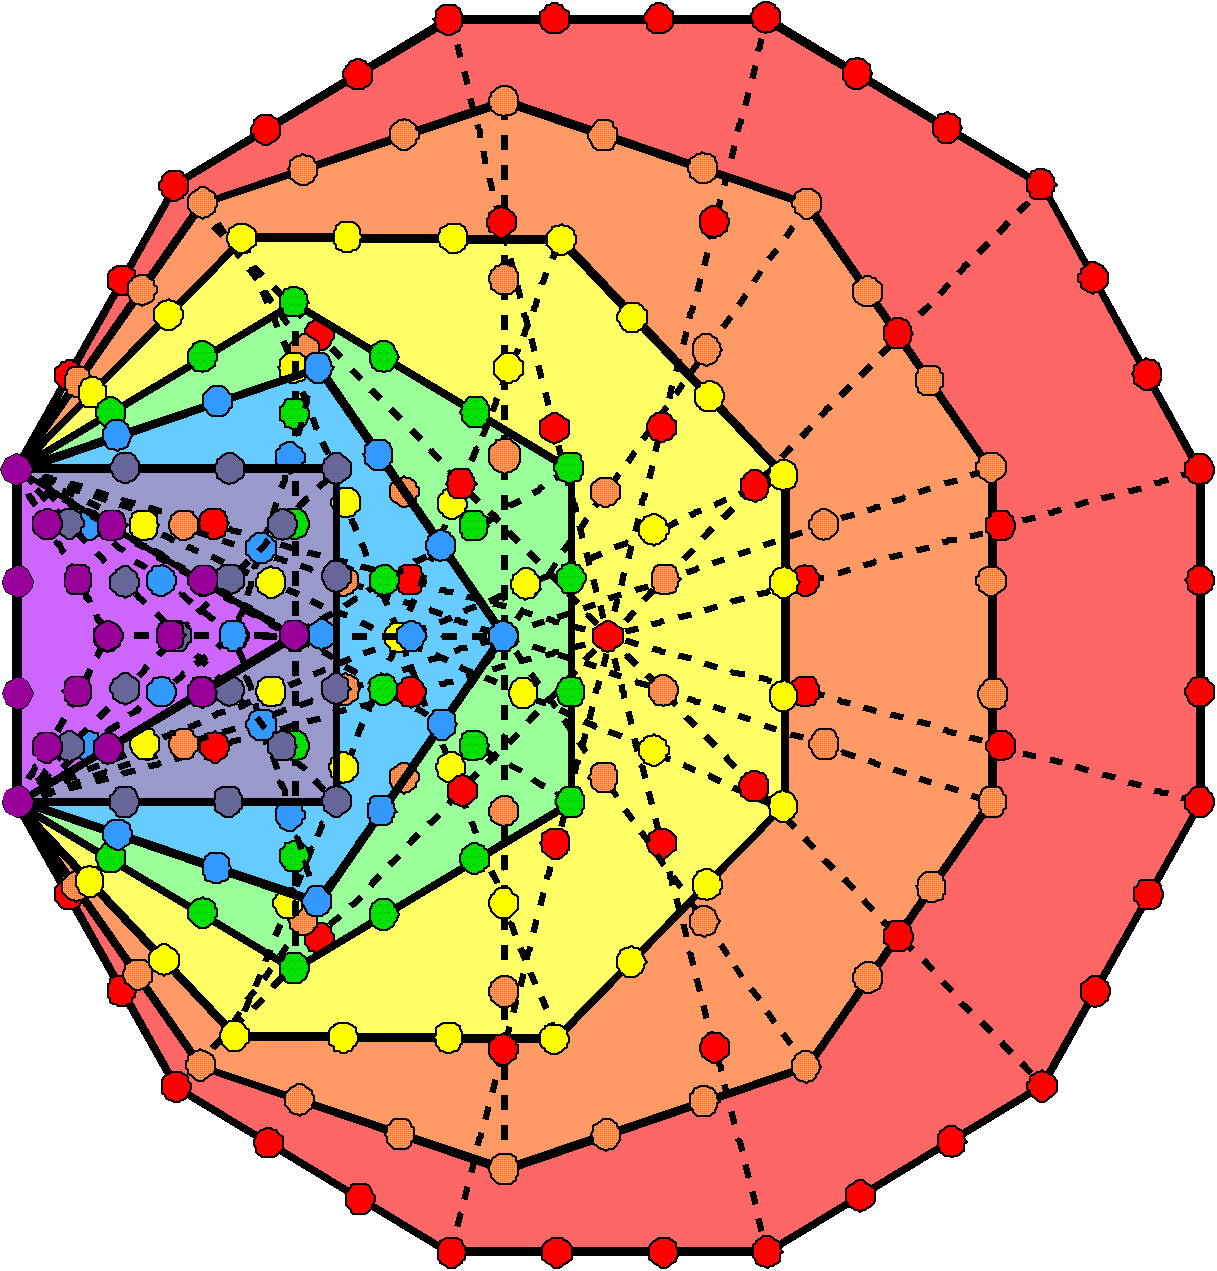 217 boundary yods in 7 enfolded polygons